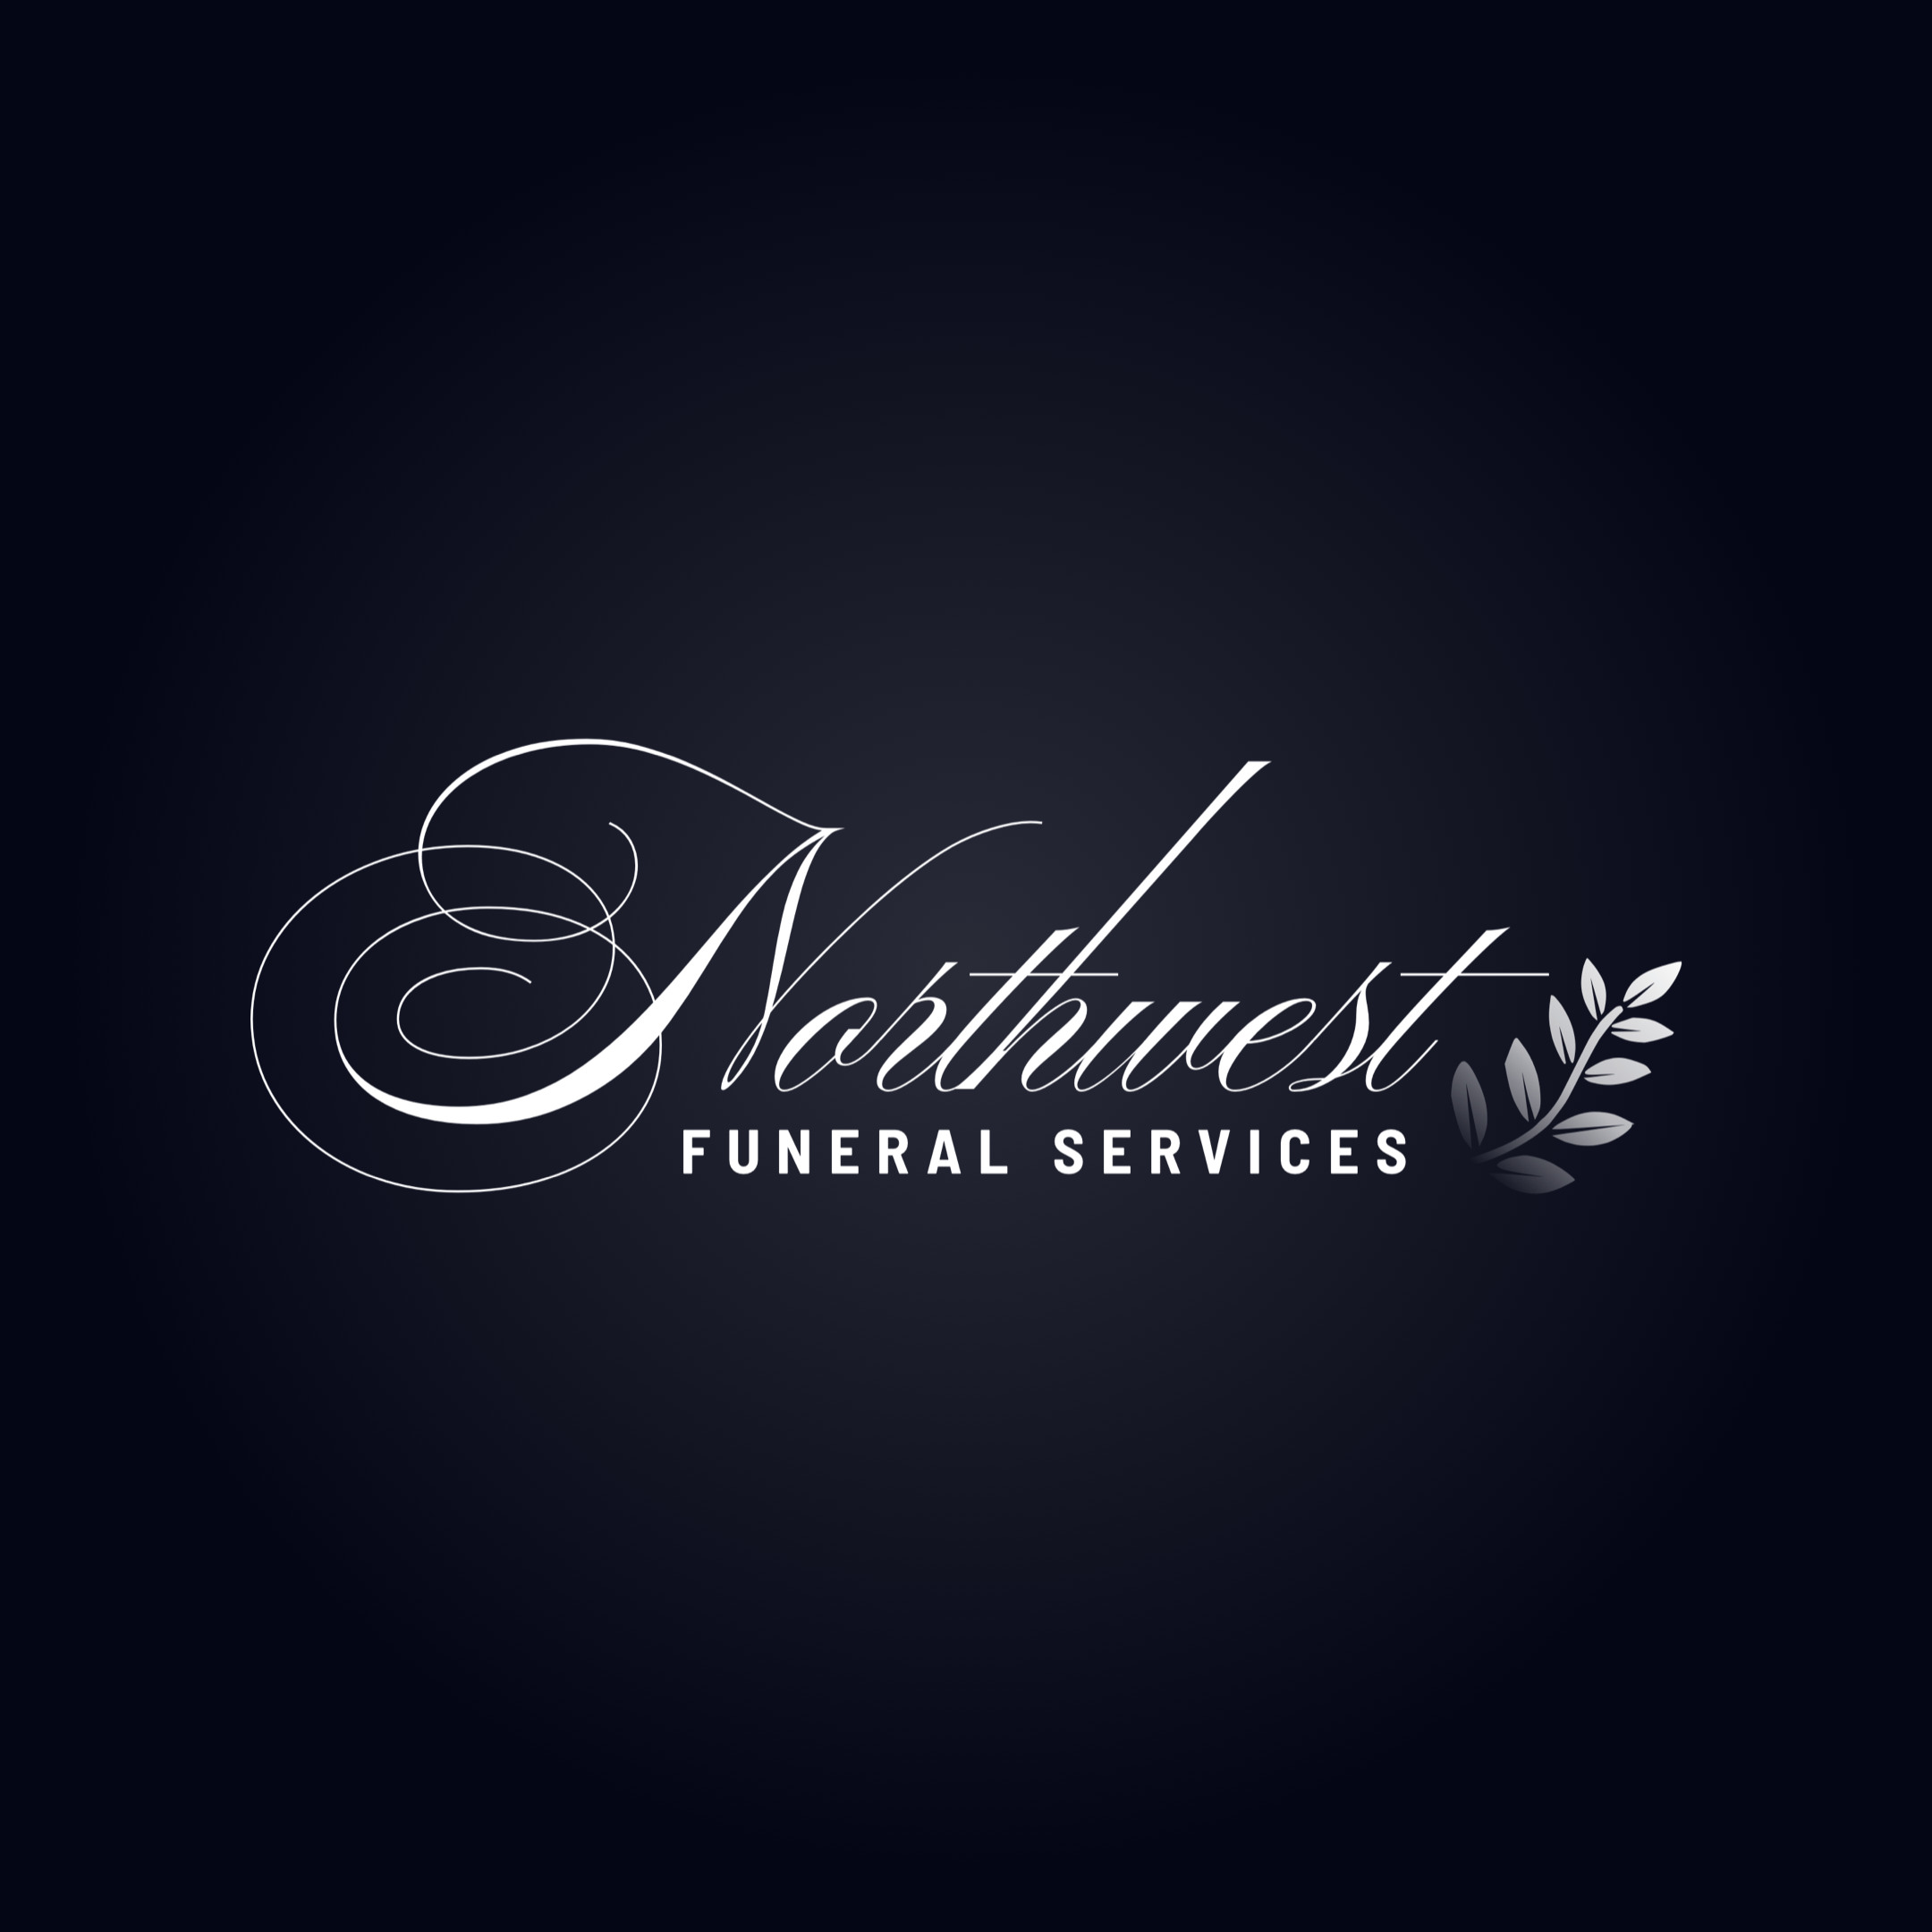 Northwest Funeral Services project image